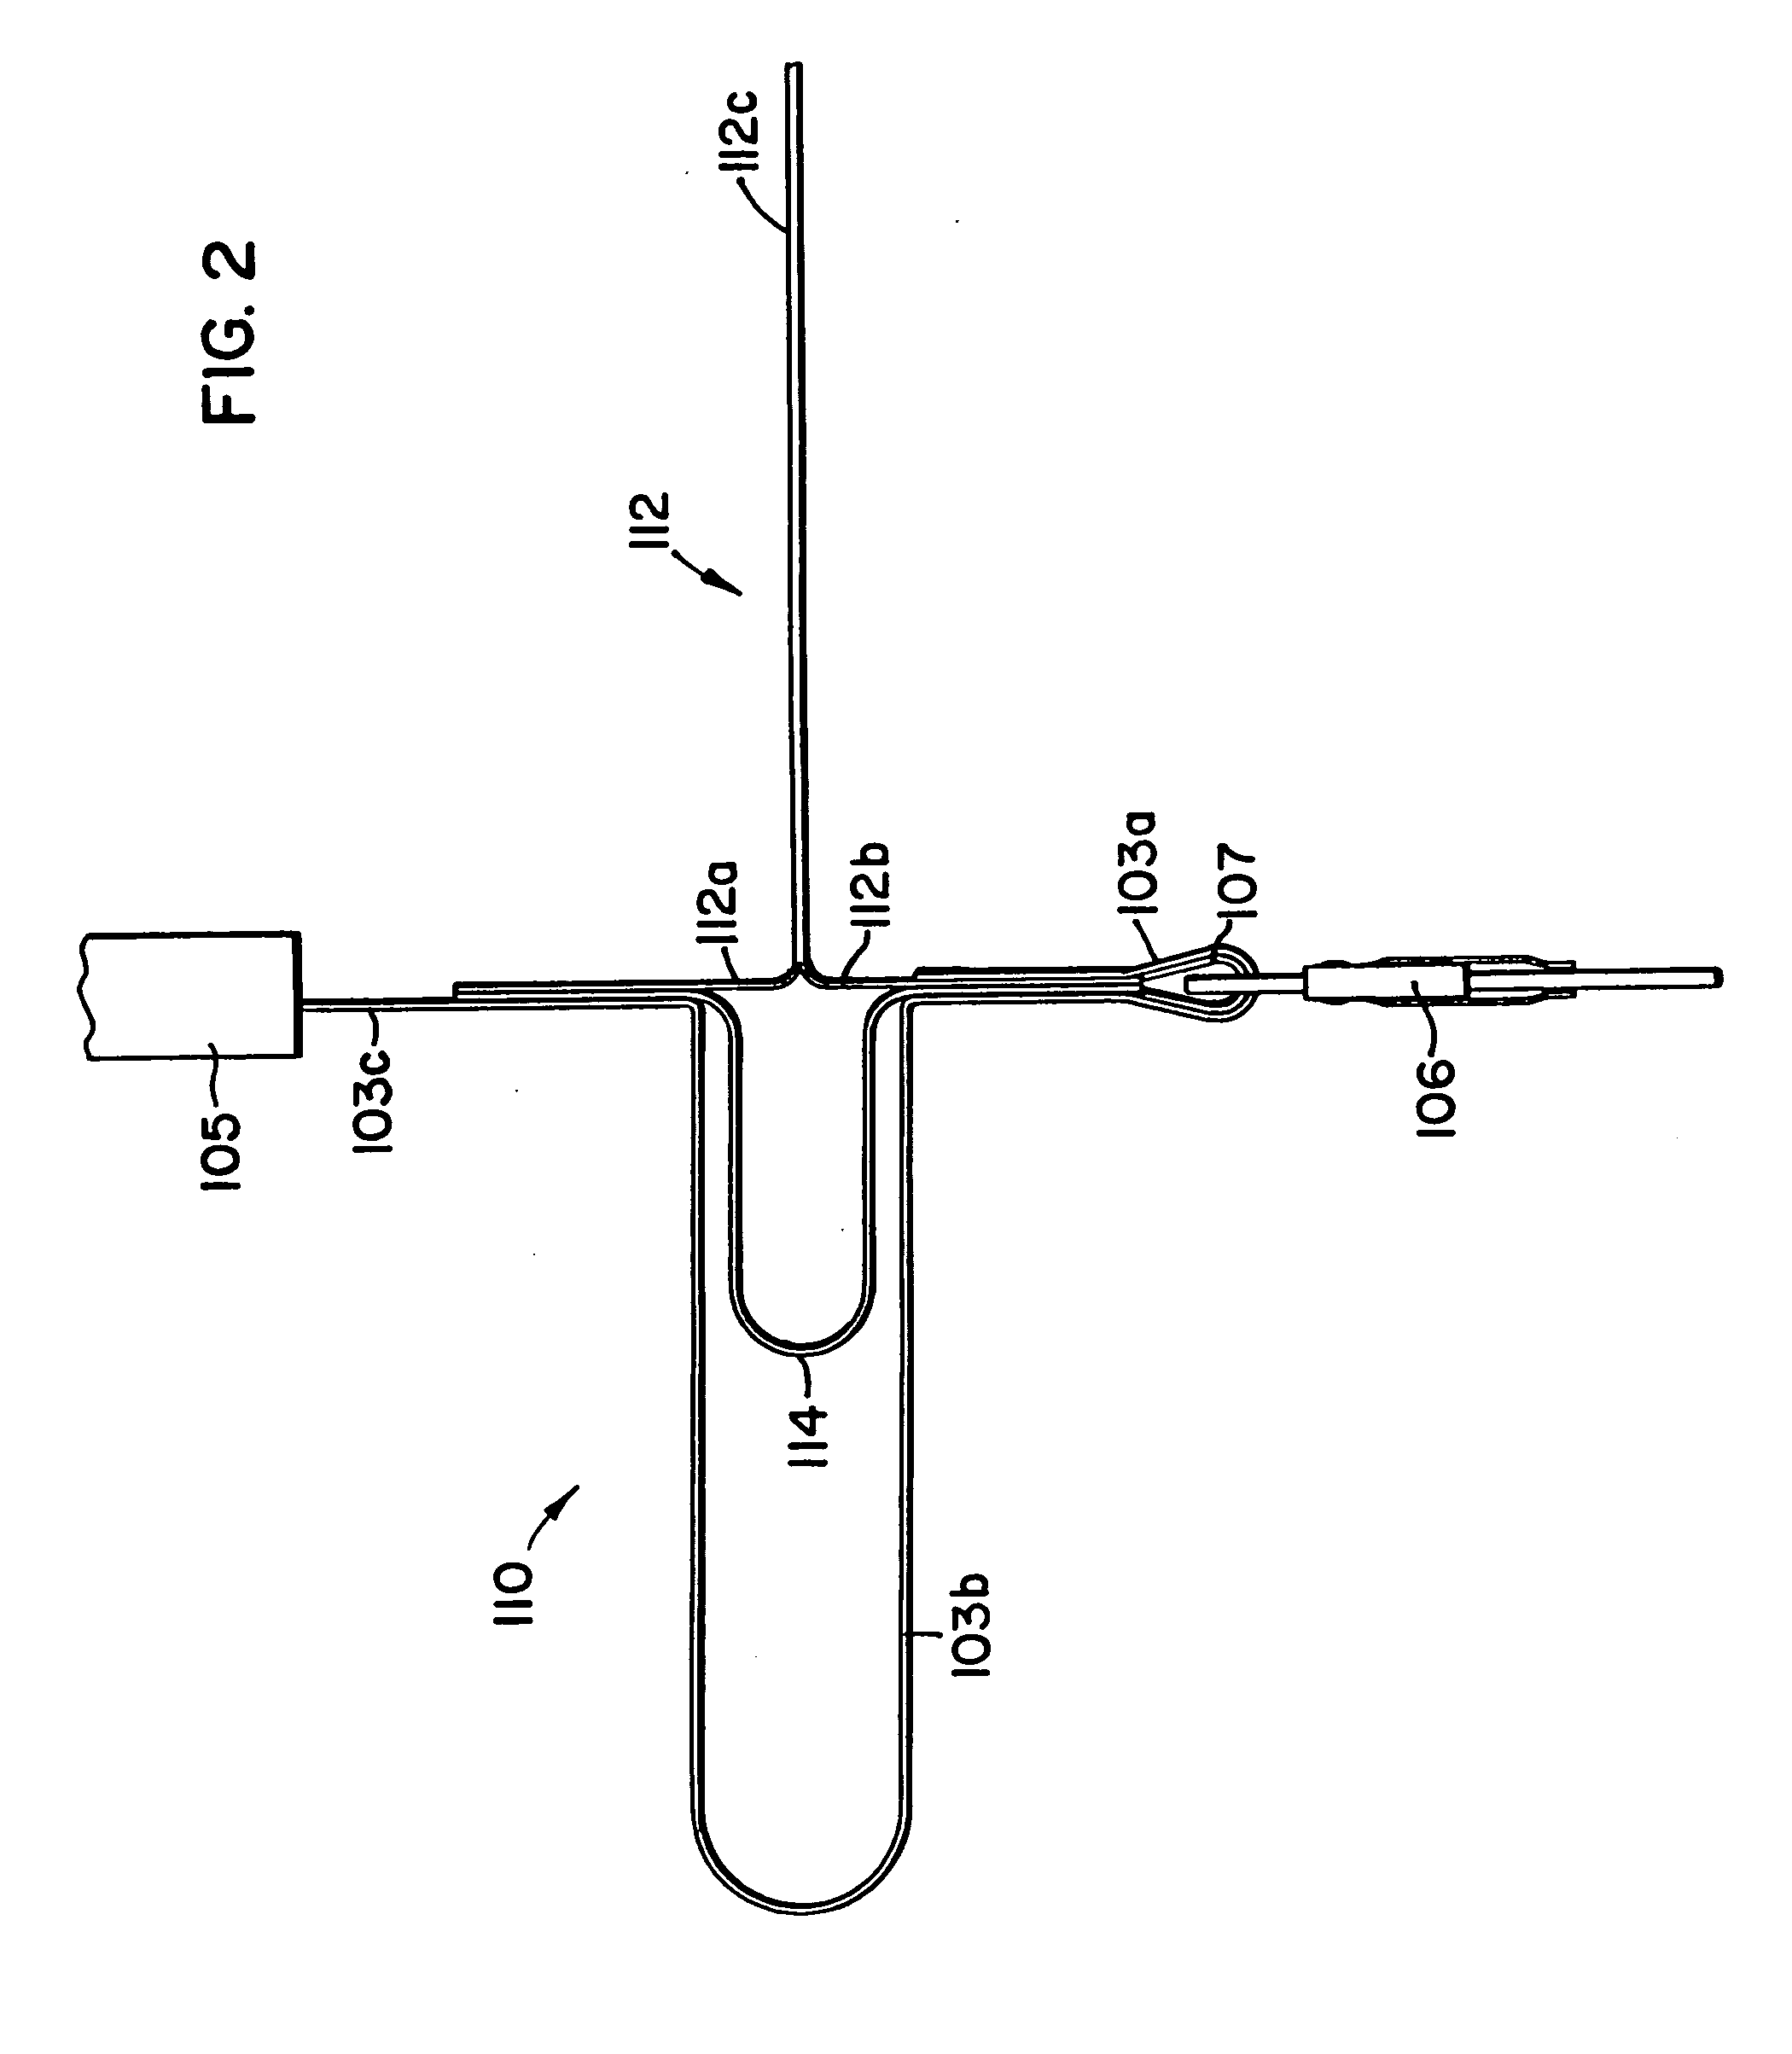 Tension device for use with a self-retracting lifeline